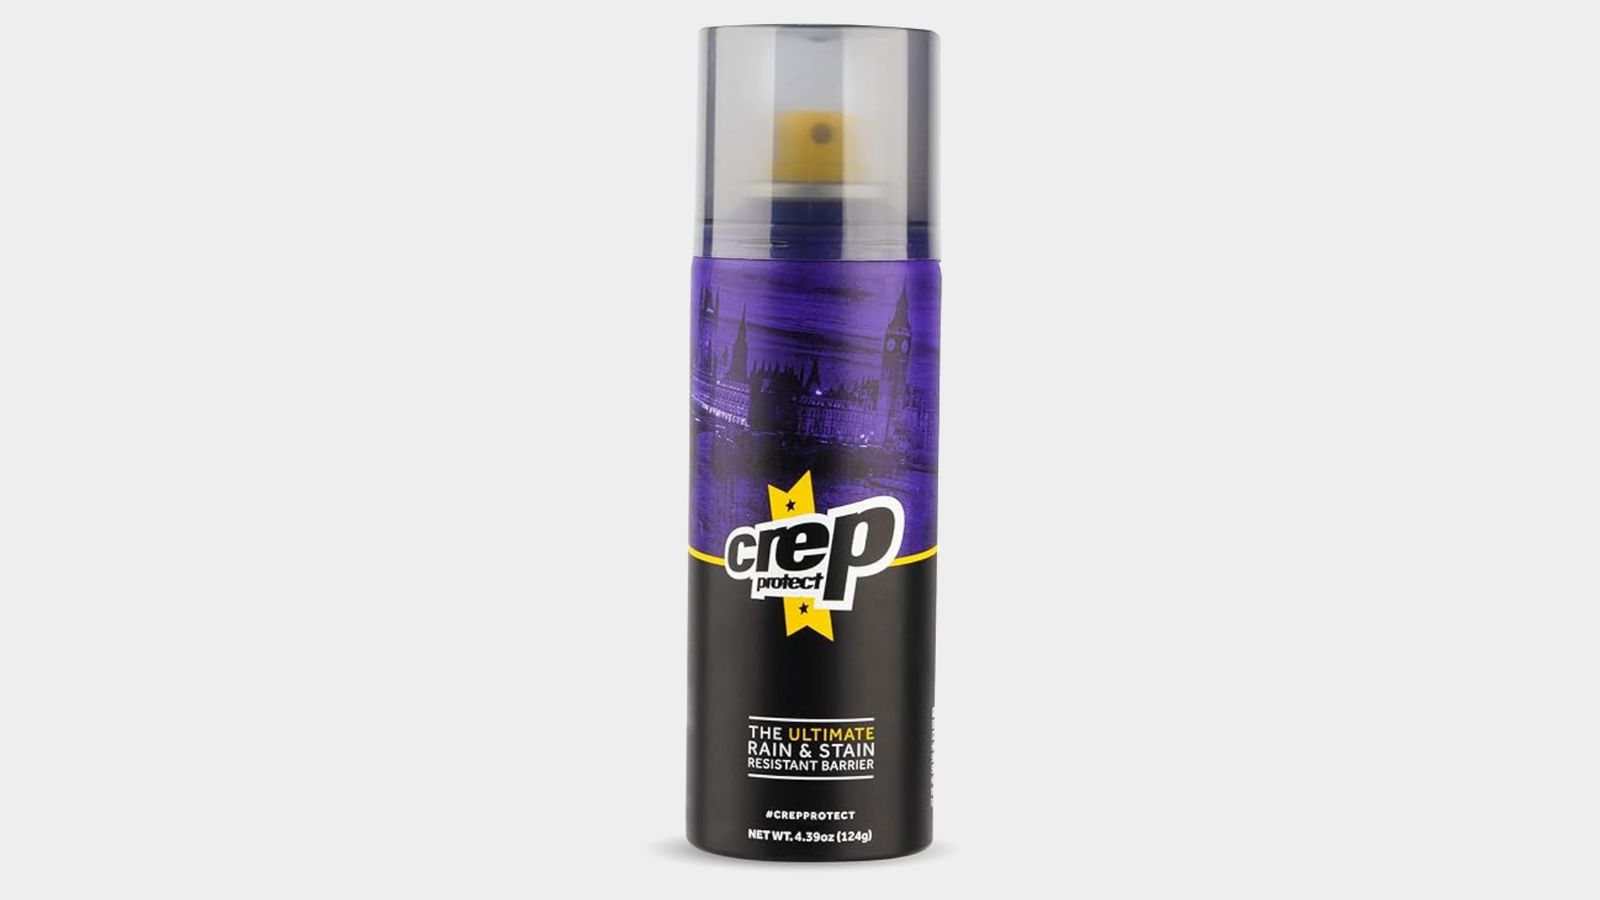 Crep Protect product image or a purple and black spray can with yellow trim.